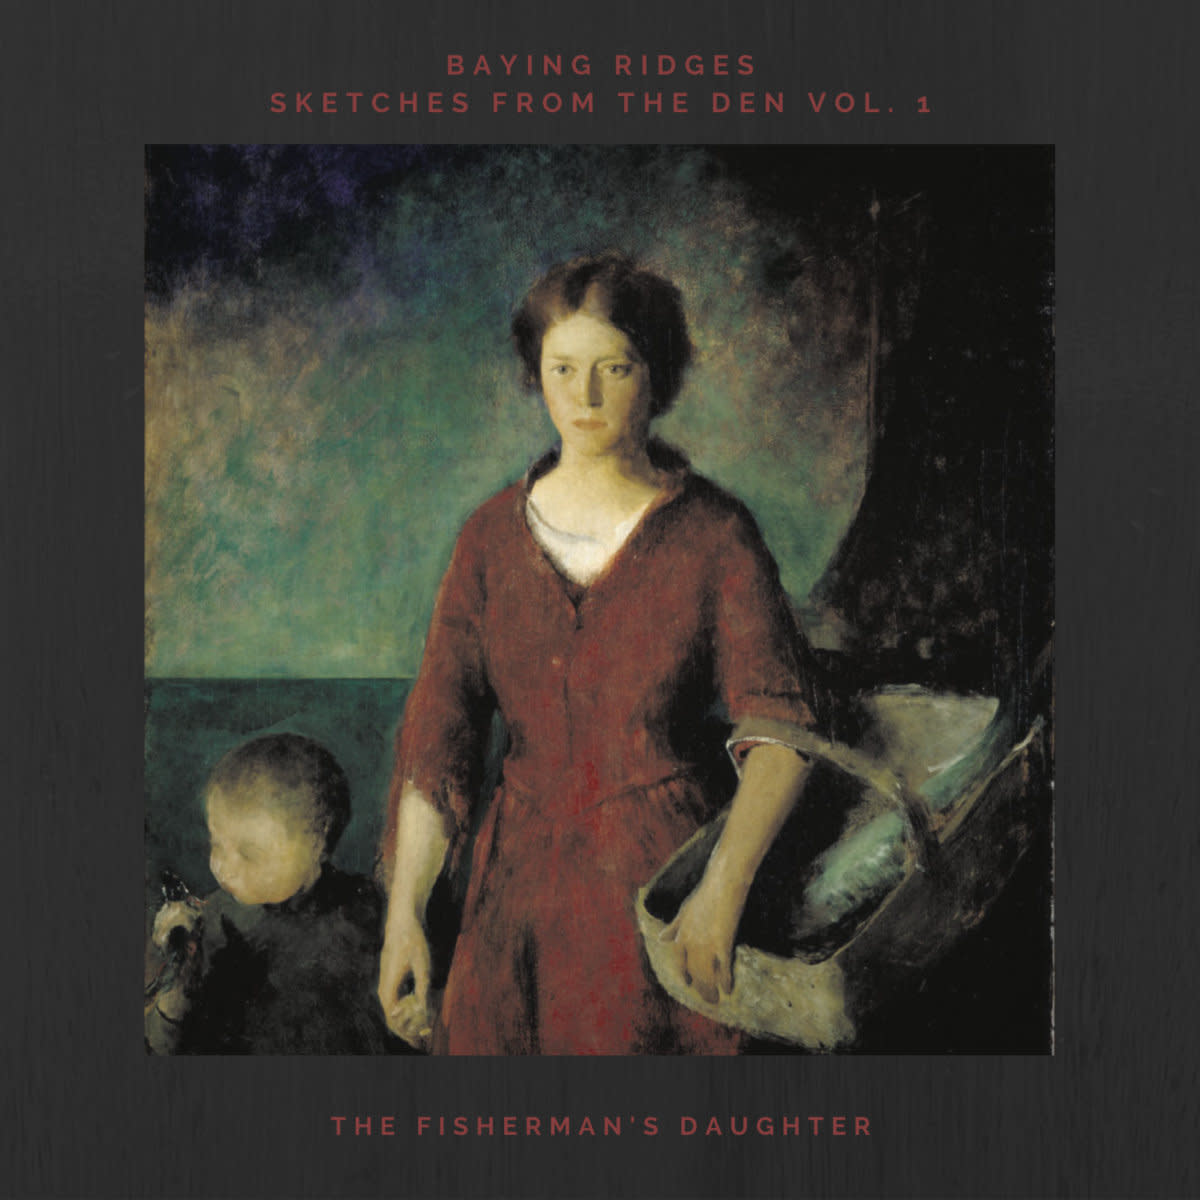 ambient-single-review-sketches-from-the-den-vol-1-the-fishermans-daughter-by-baying-ridges